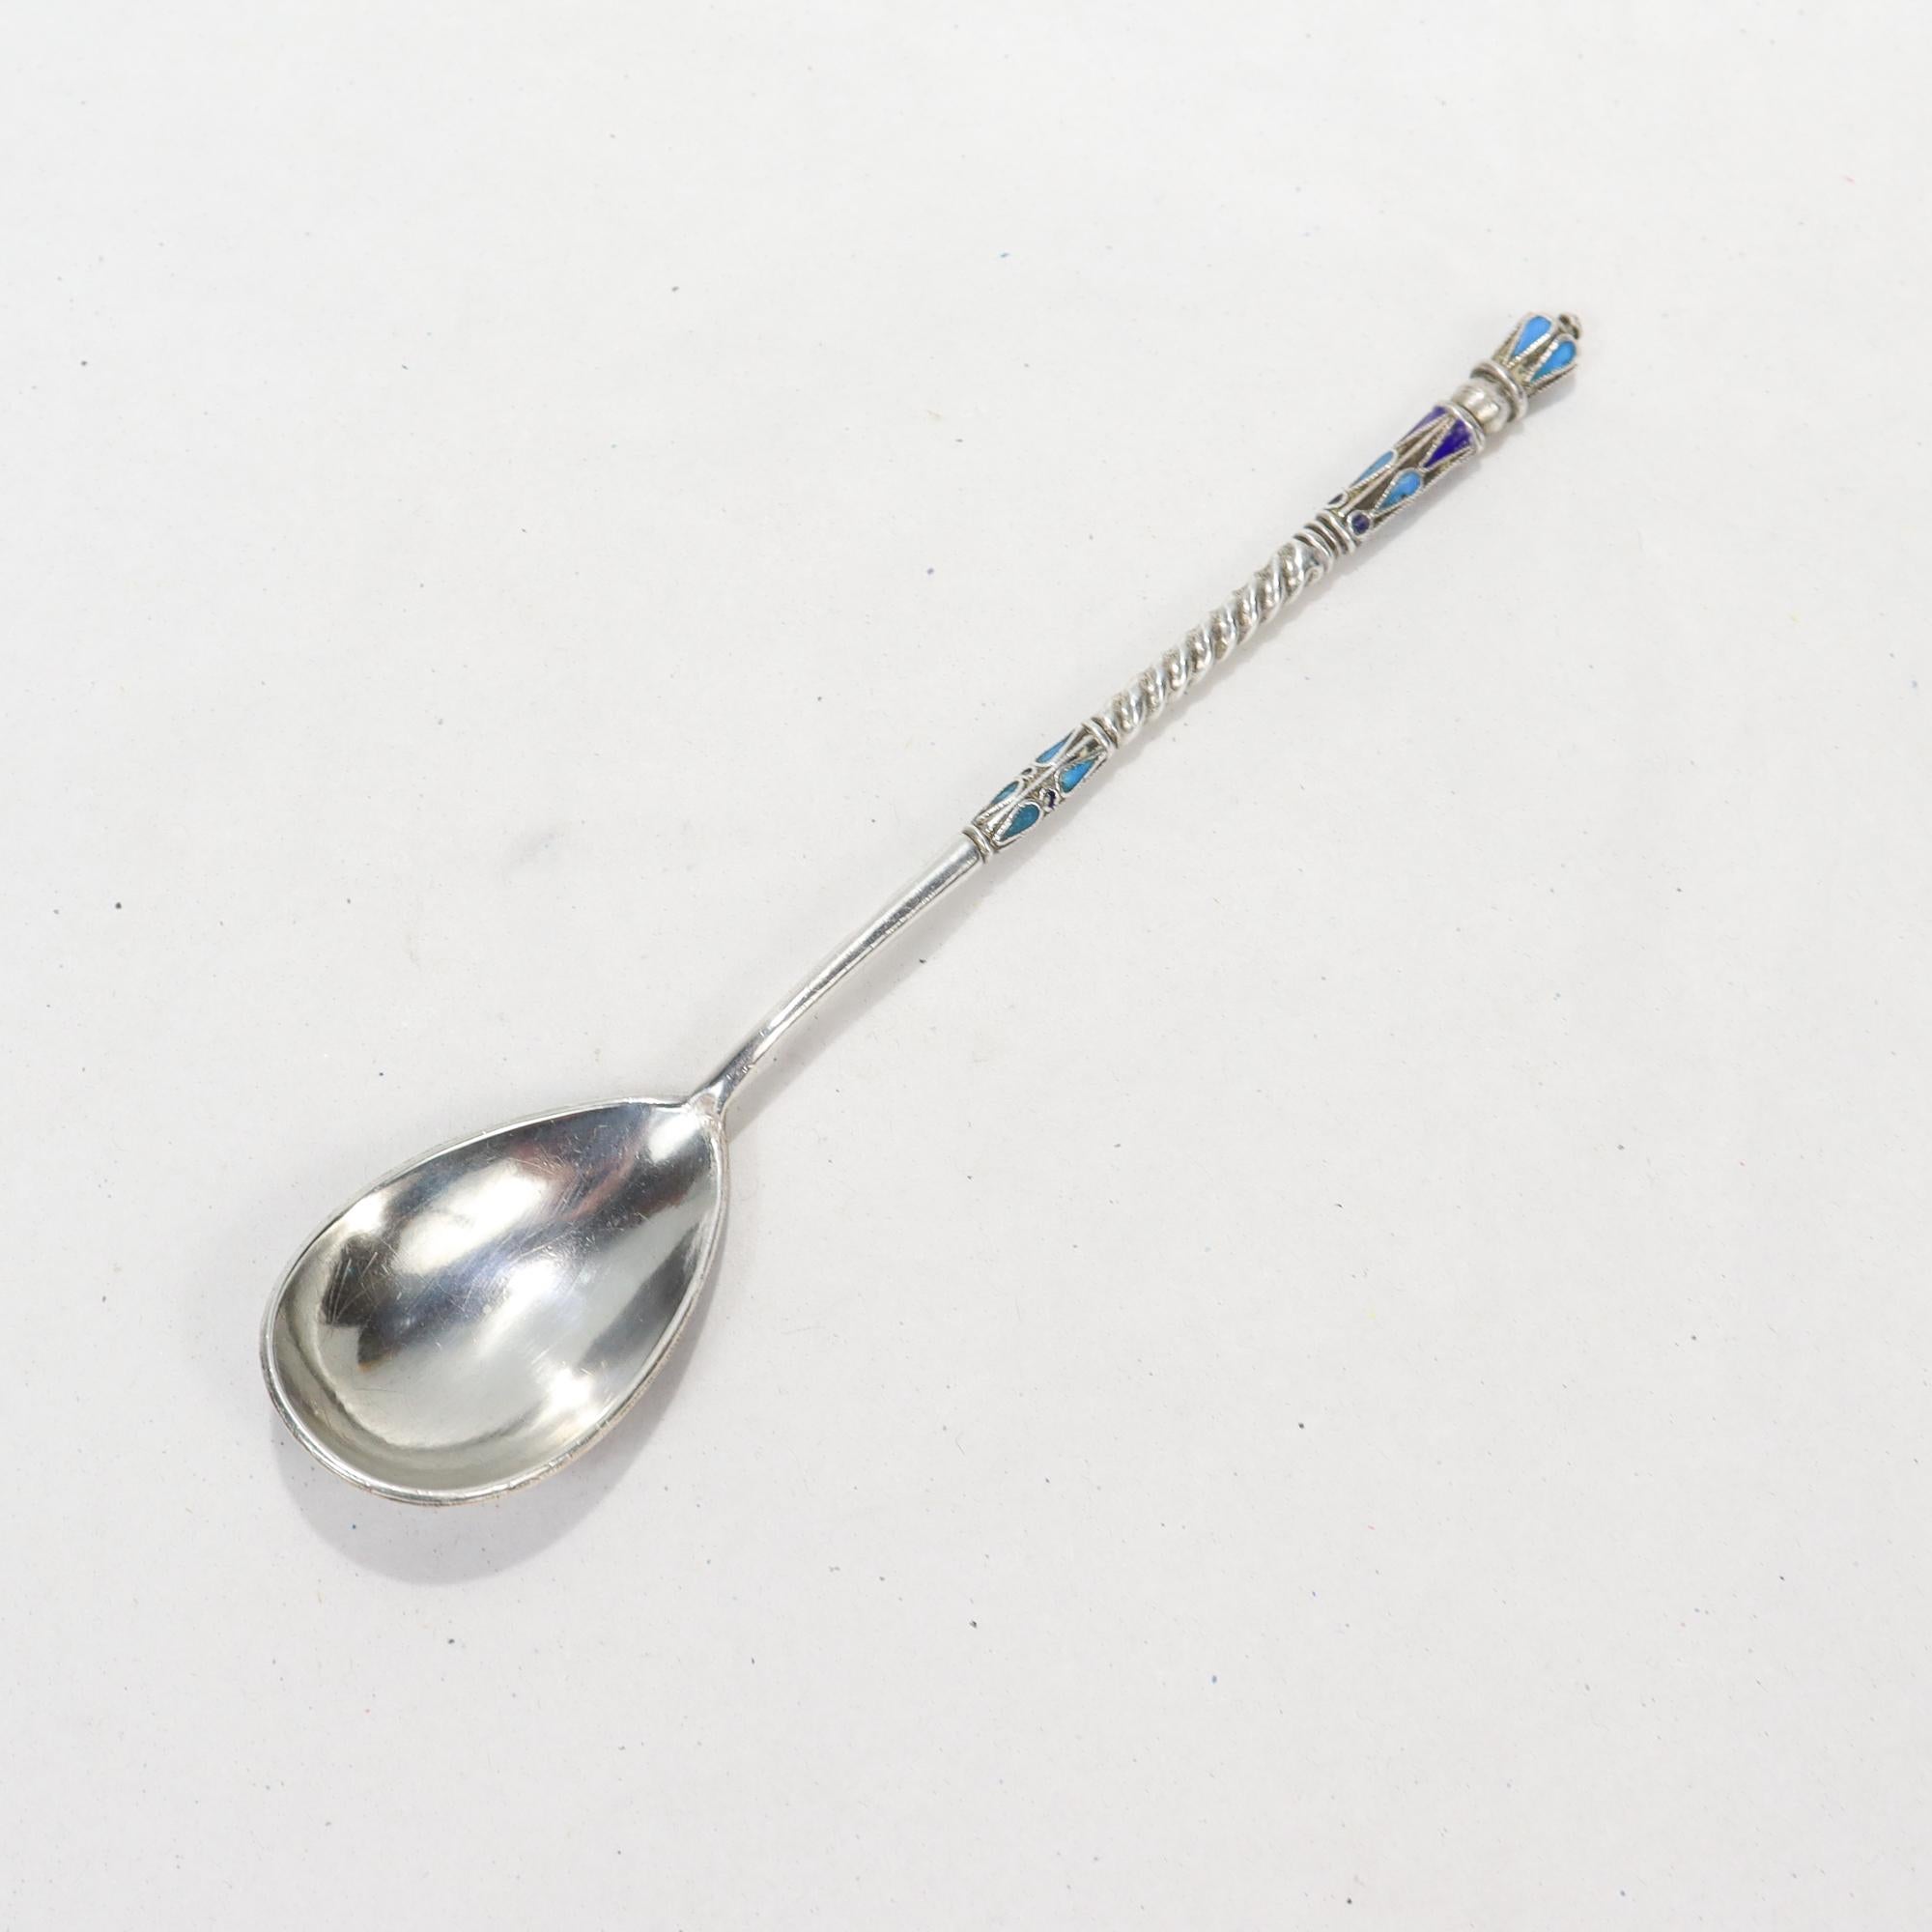 A fine Russian silver & enamel spoon.

With polychrome cloisonné enamel decoration to both the front and reverse.

Simply a wonderful piece of Russian silver!

Date:
Late 19th or Early 20th Century

Overall Condition:
It is in overall good,